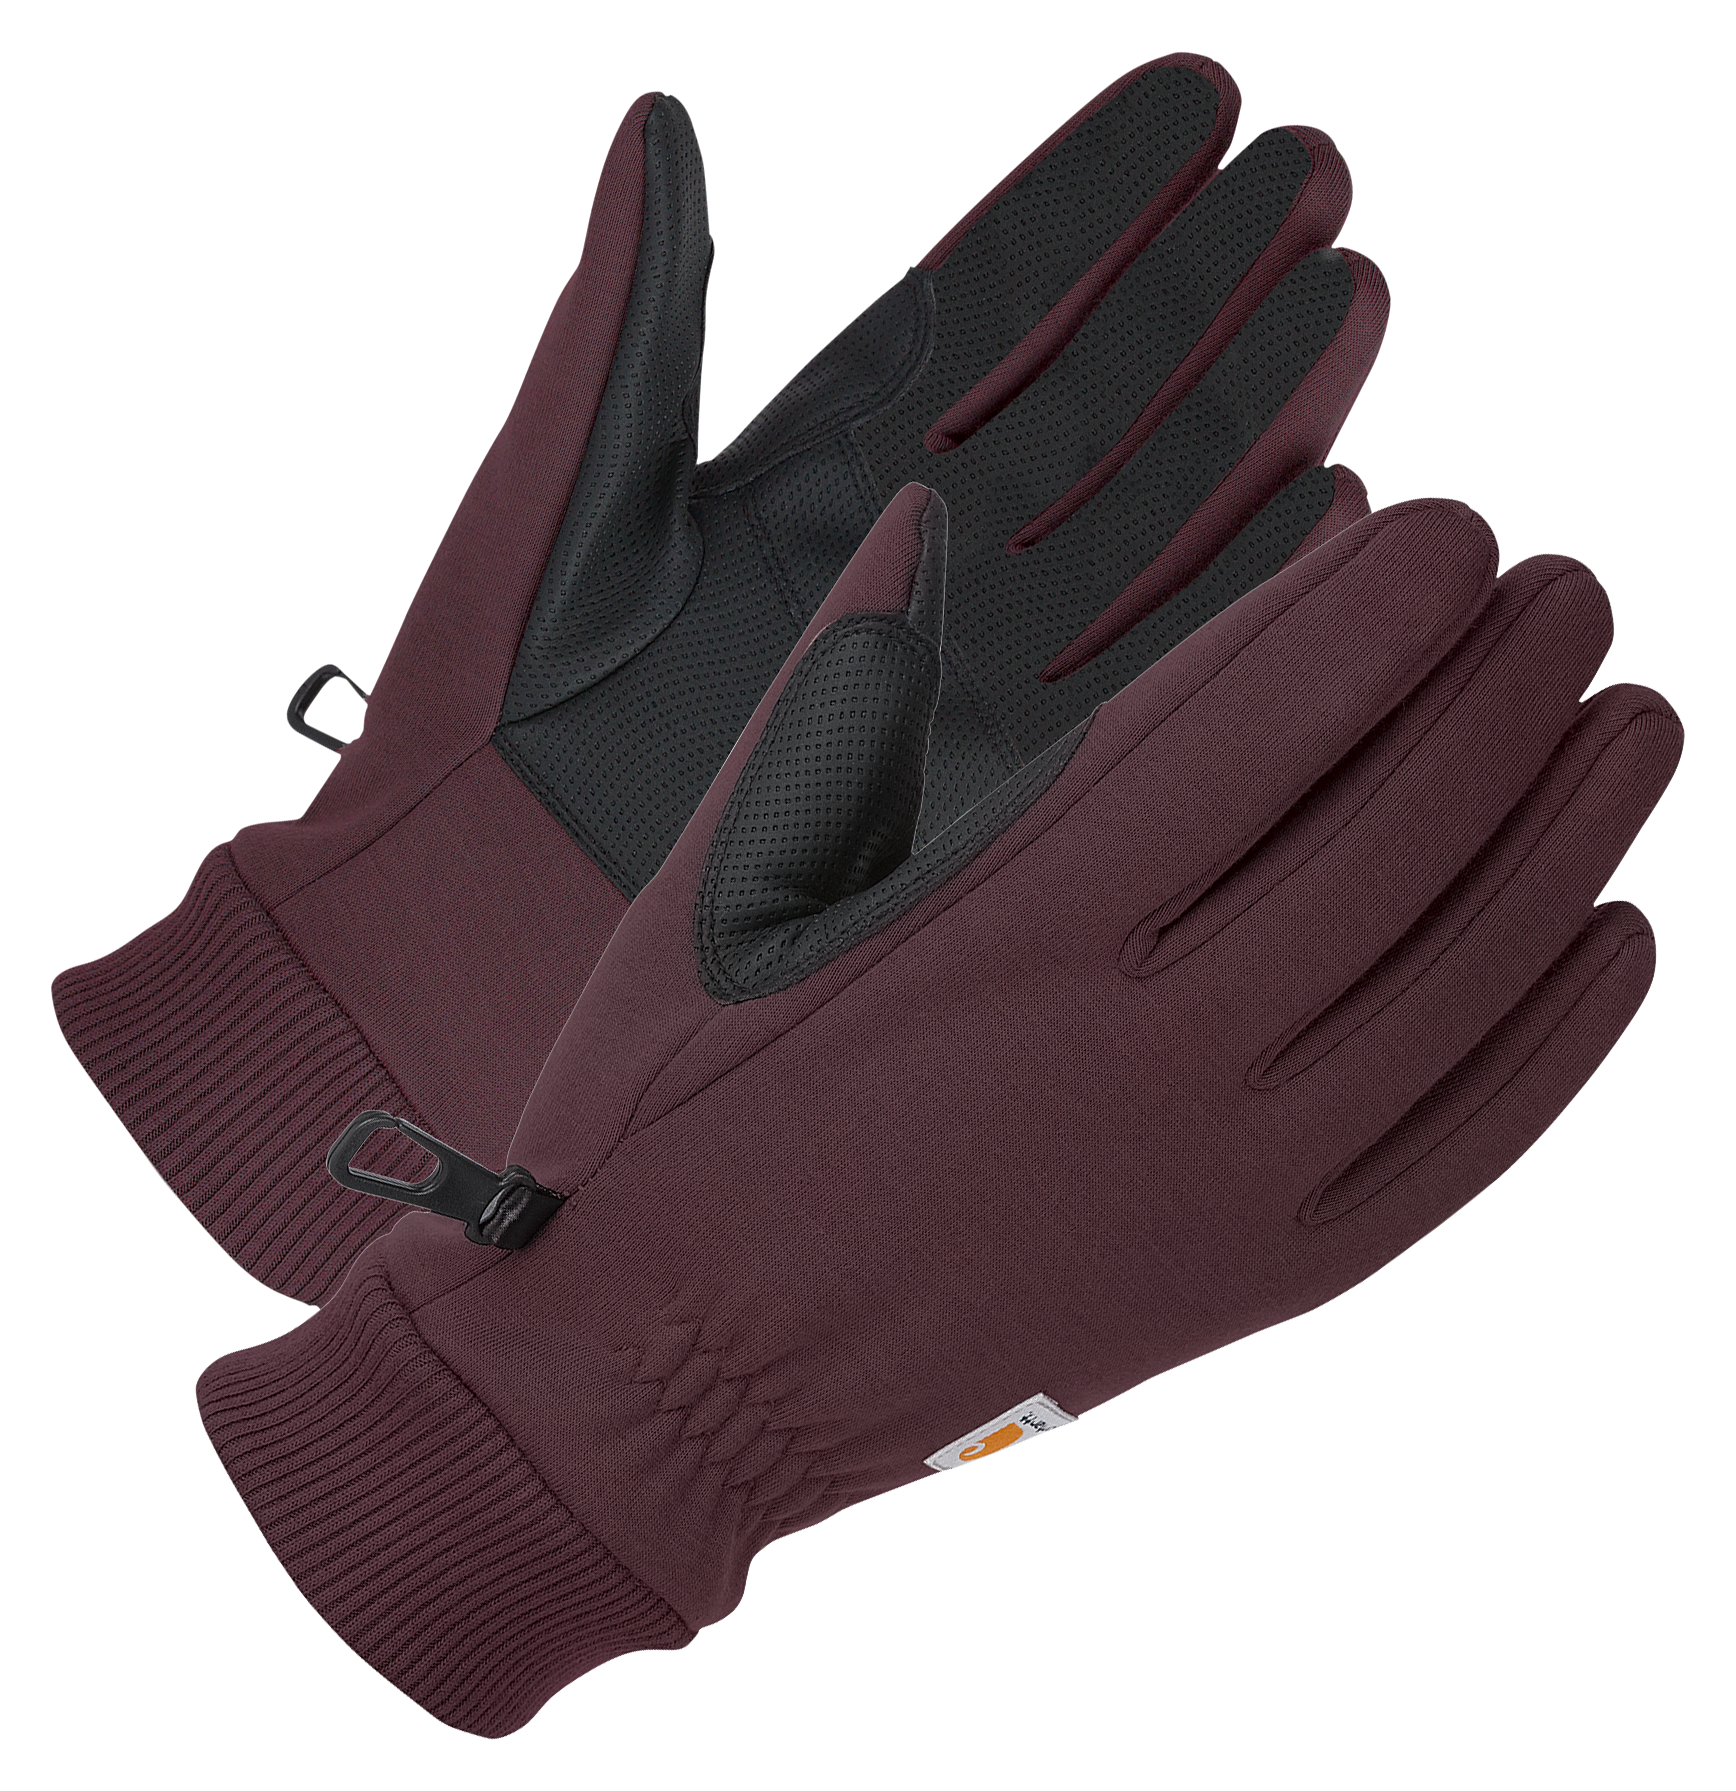 Carhartt C-Touch Knit Gloves for Ladies - Blackberry - L